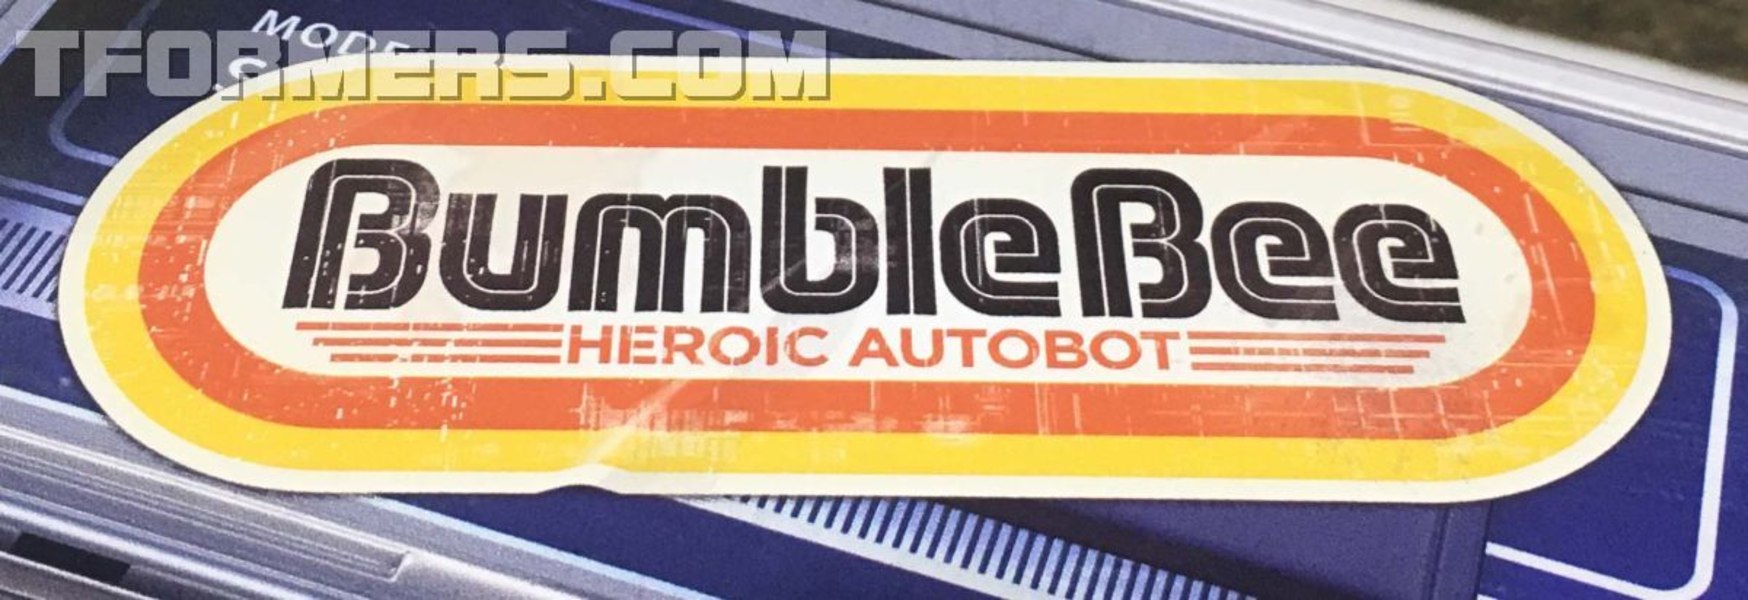 Transformers Bumblebee Movie Boombox Promotional  (8 of 19)